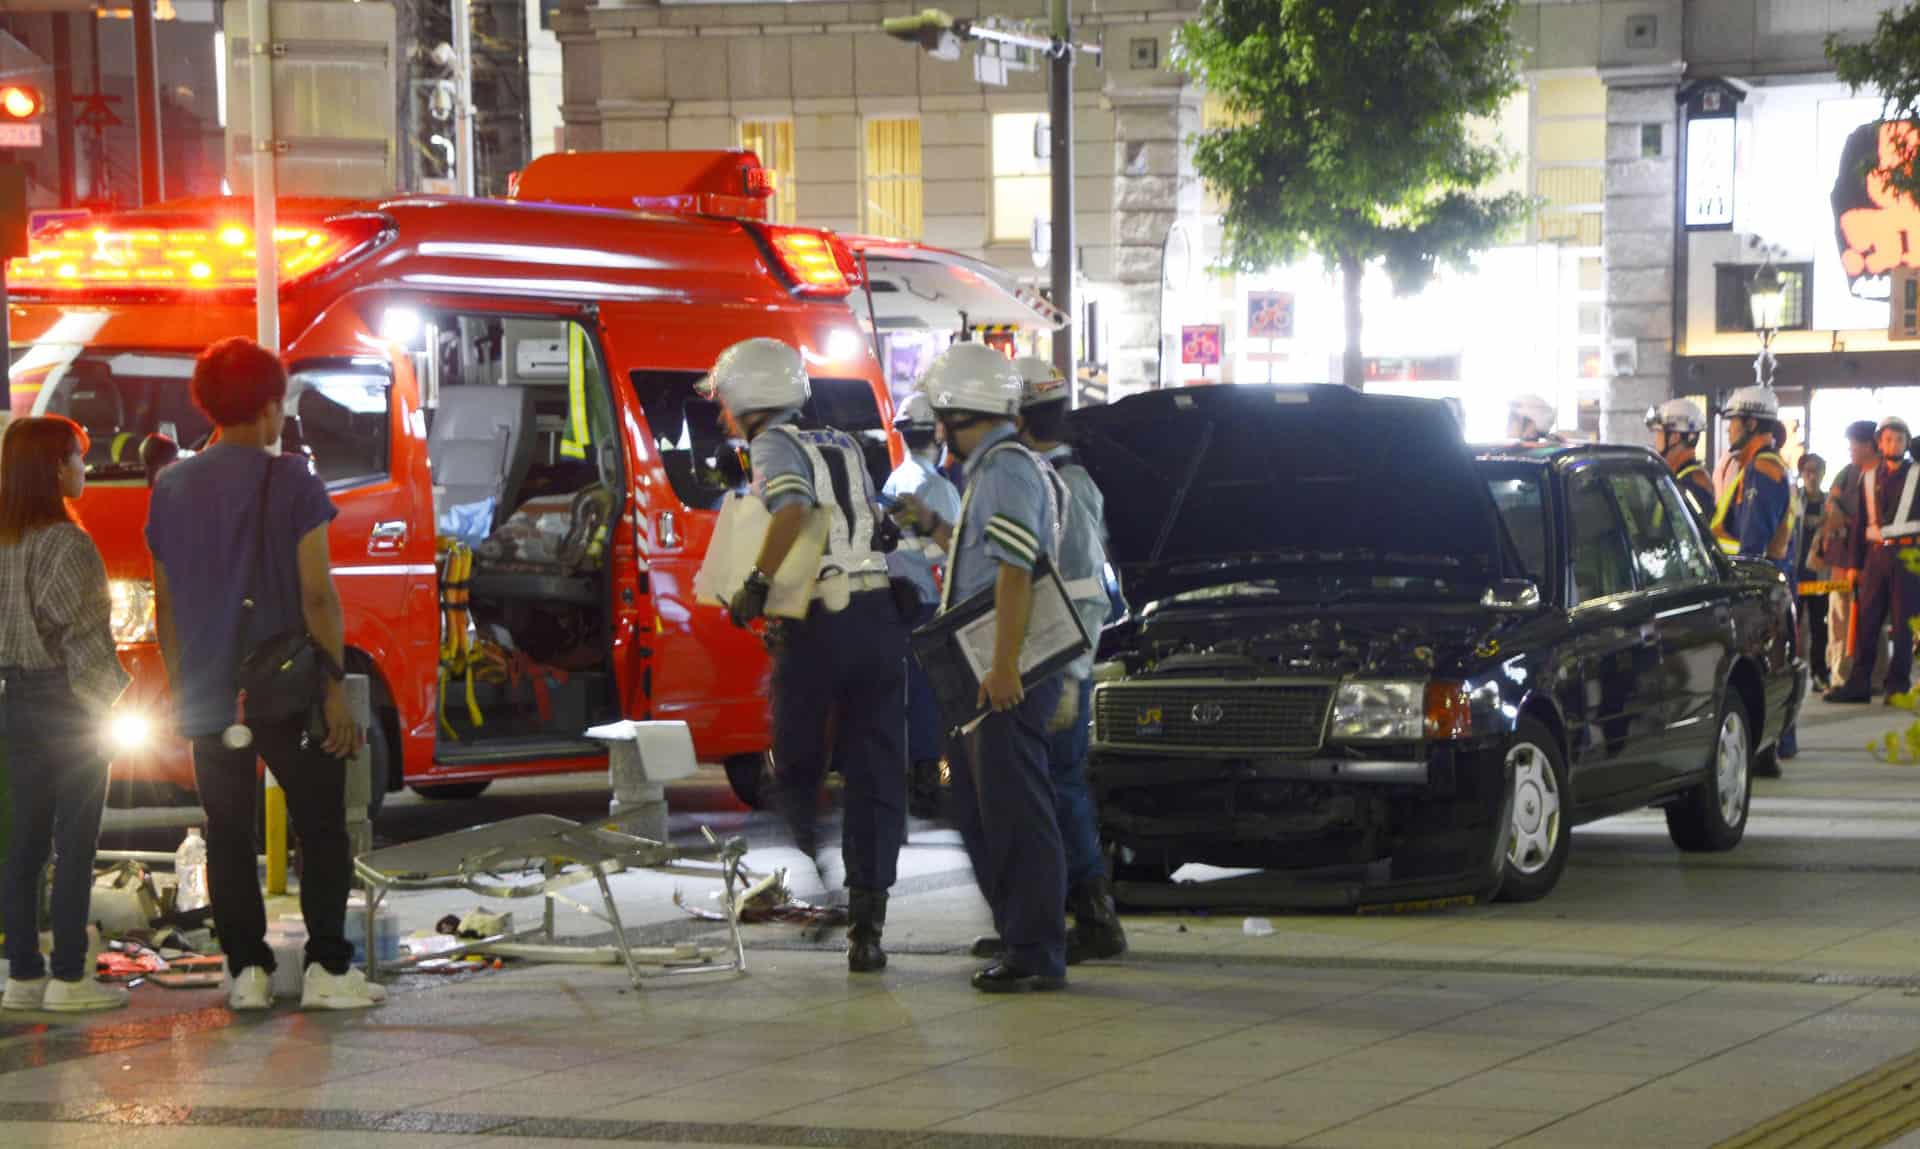 Cabbie injures 7 people after veering into street music performance